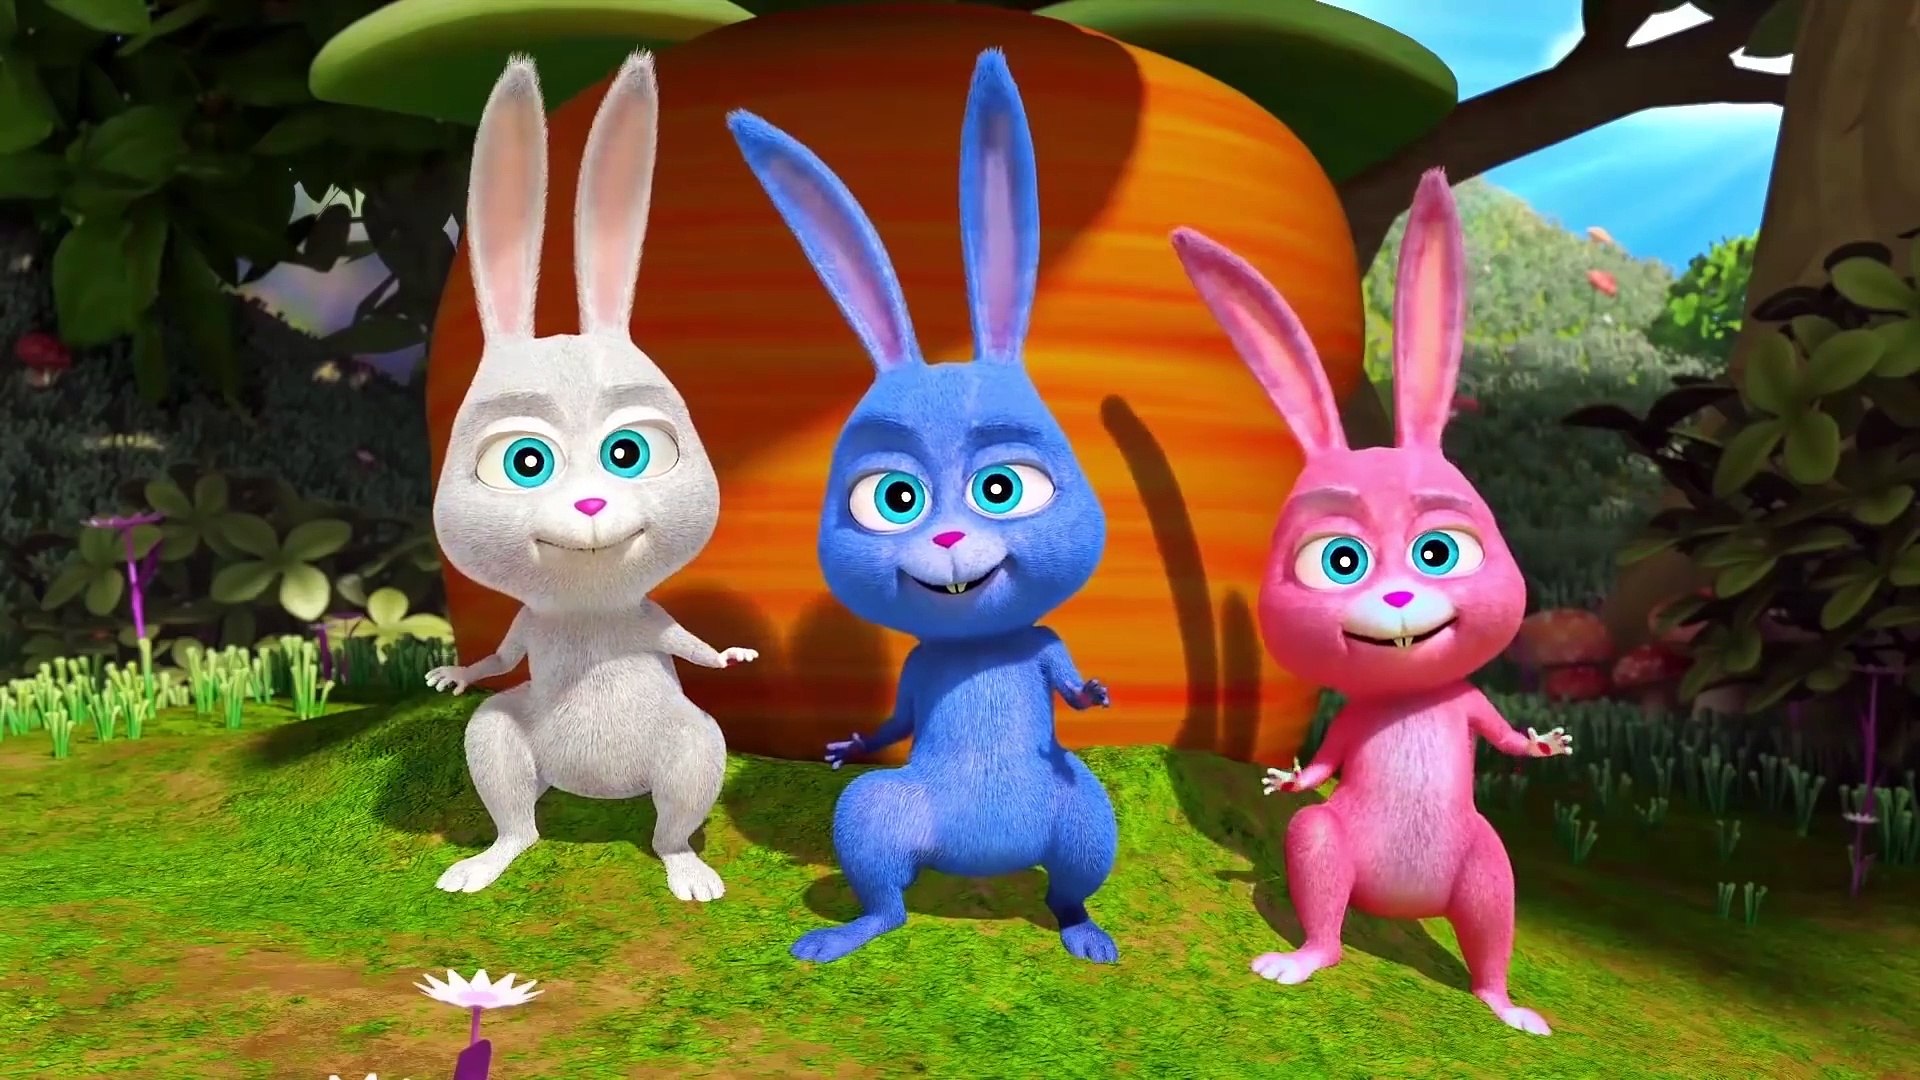 Sleeping Bunnies - The Cutest Songs for Children - LooLoo Kids - video  Dailymotion